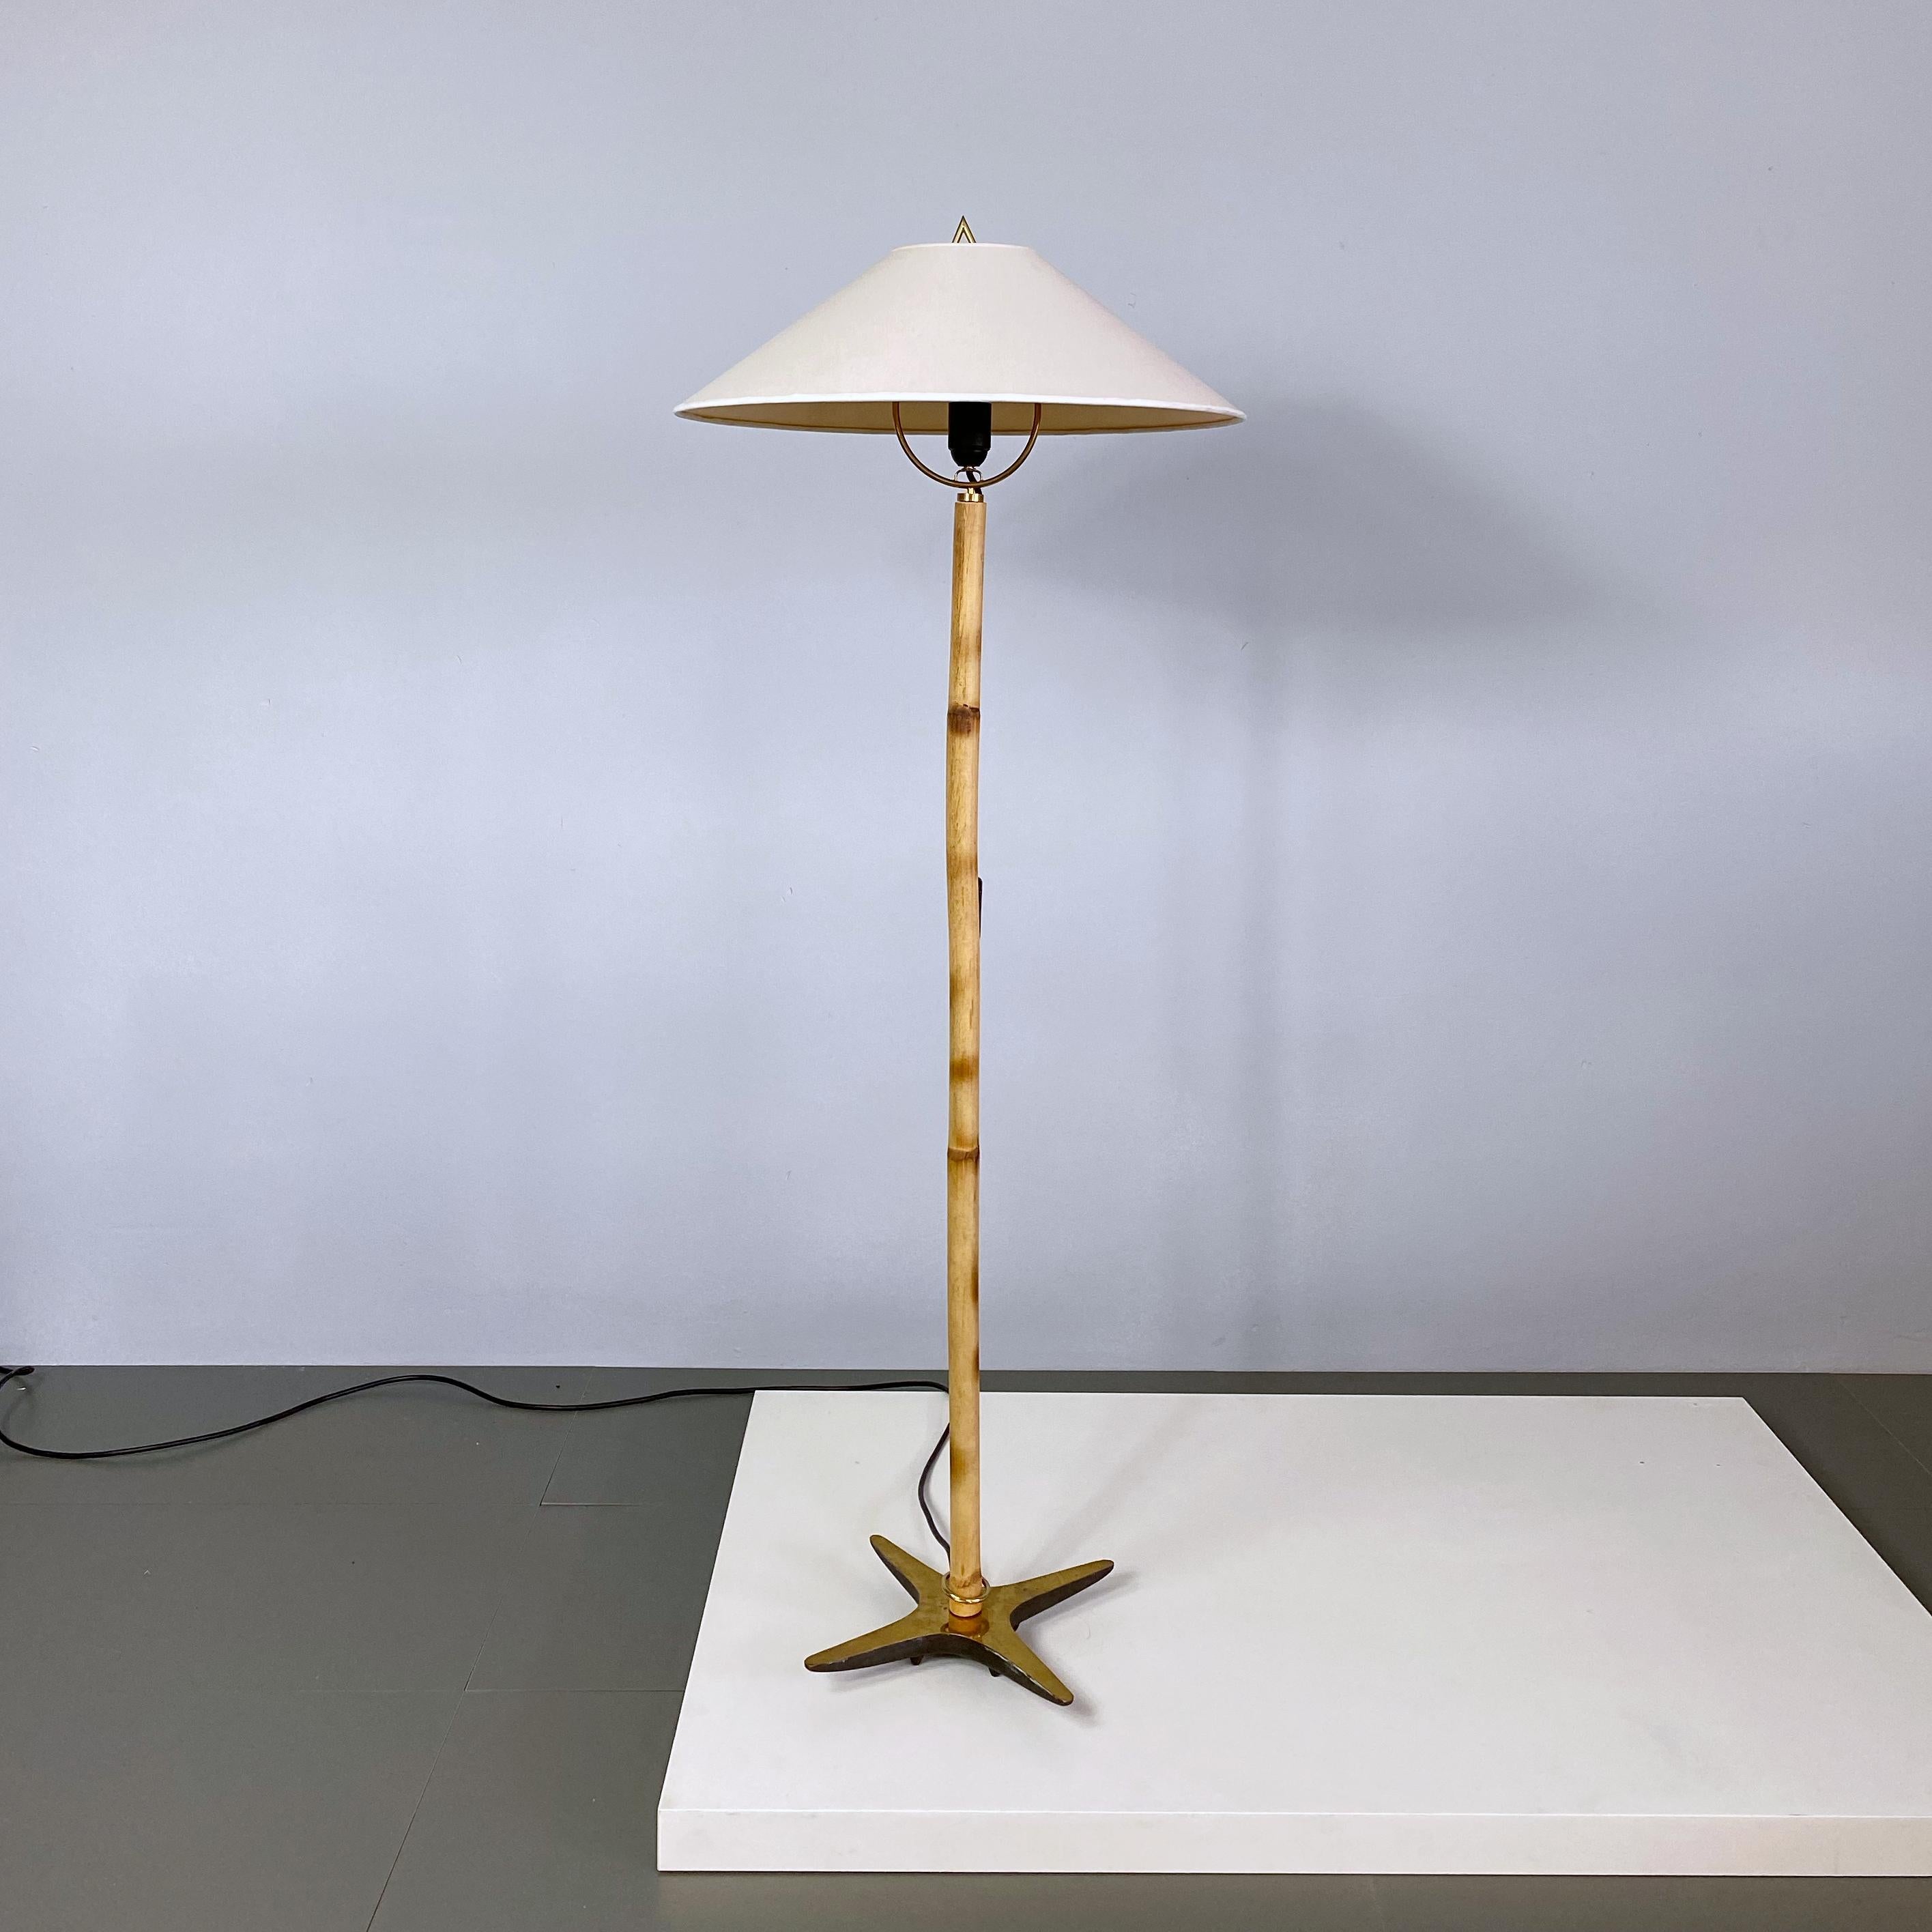 Simple and elegant midcentury floor lamp designed by Carl Auböck and manufactured by Werkstätten Carl Auböck in Vienna. The lamp is made of a bamboo stick with a solid brass X-base which is heavy enough to allow it to tilt sideways, to have the